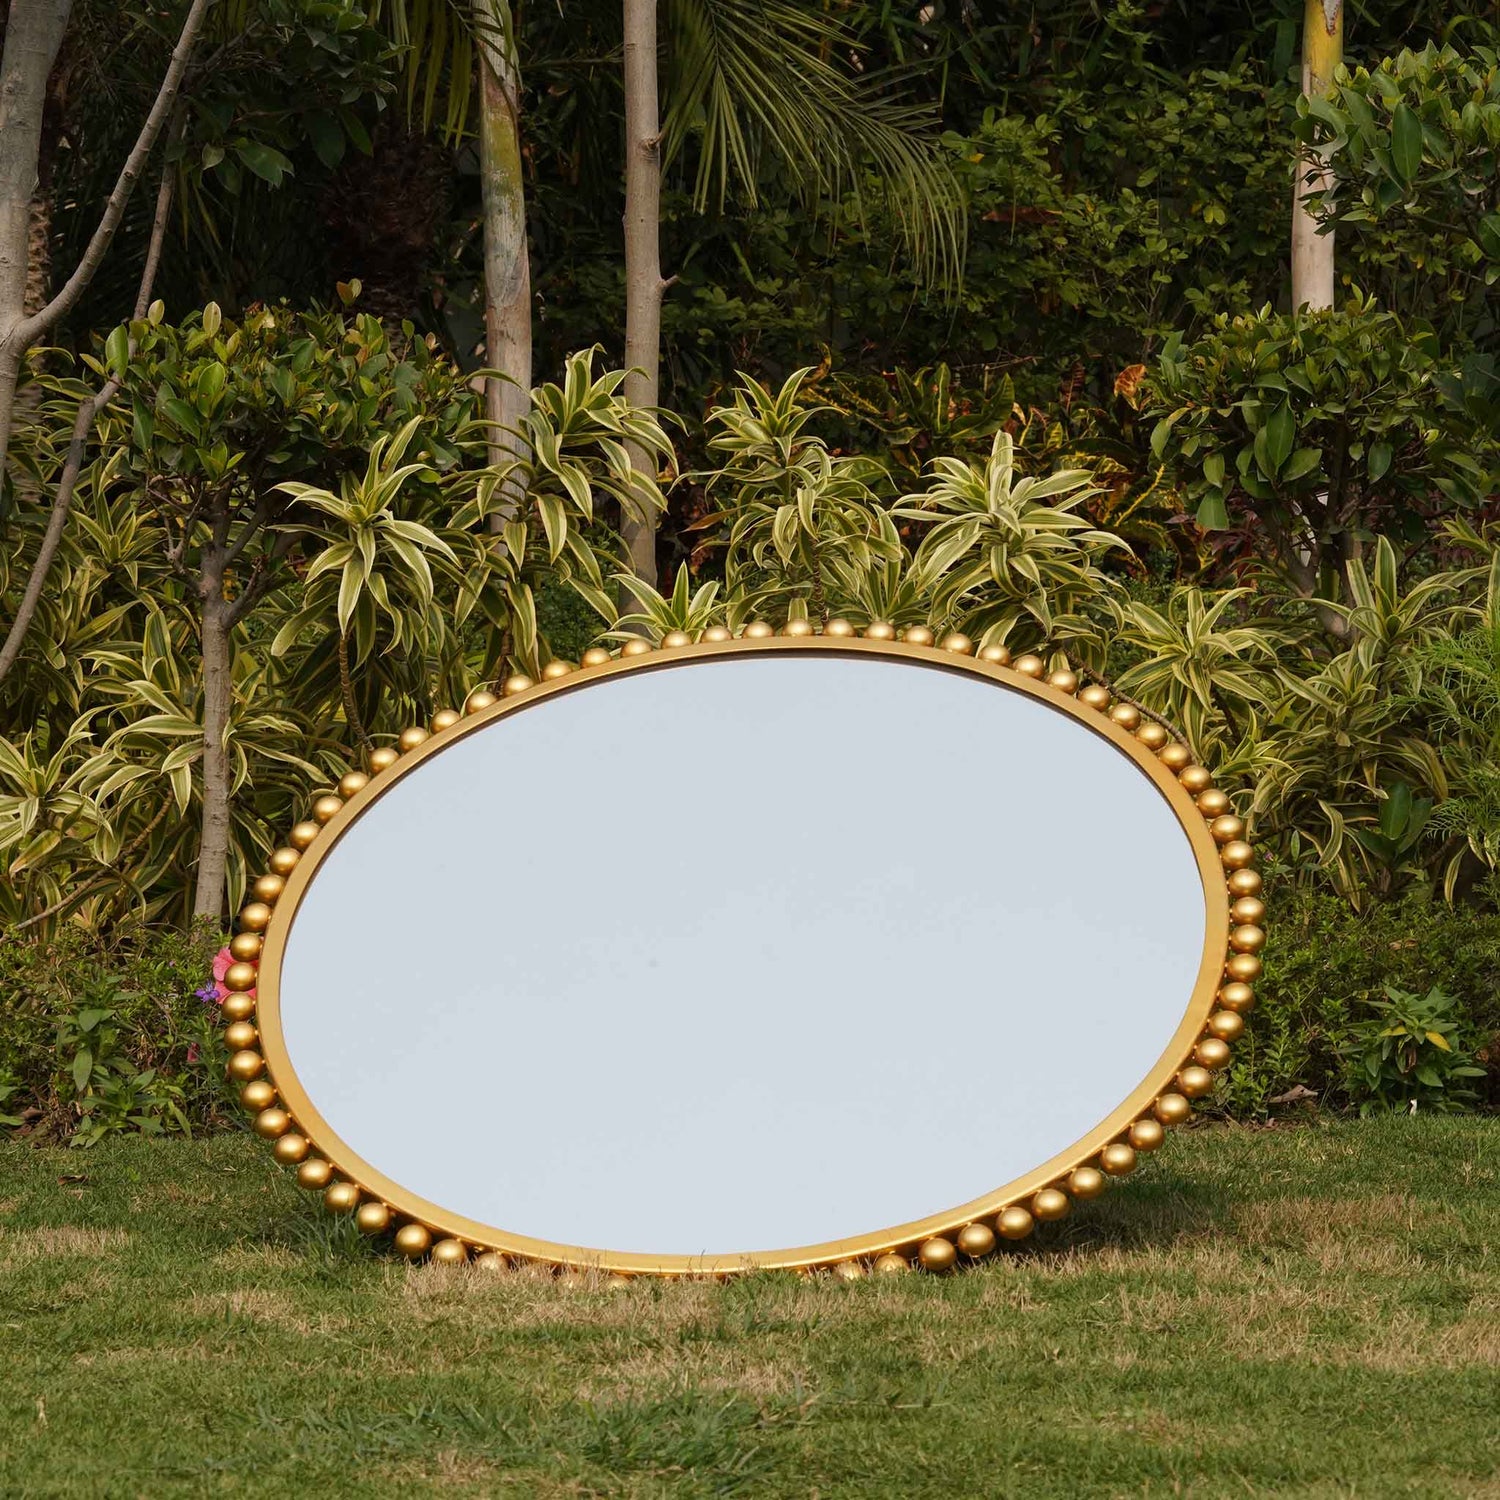 Front view of a large round mirror bordered with metallic small spheres.